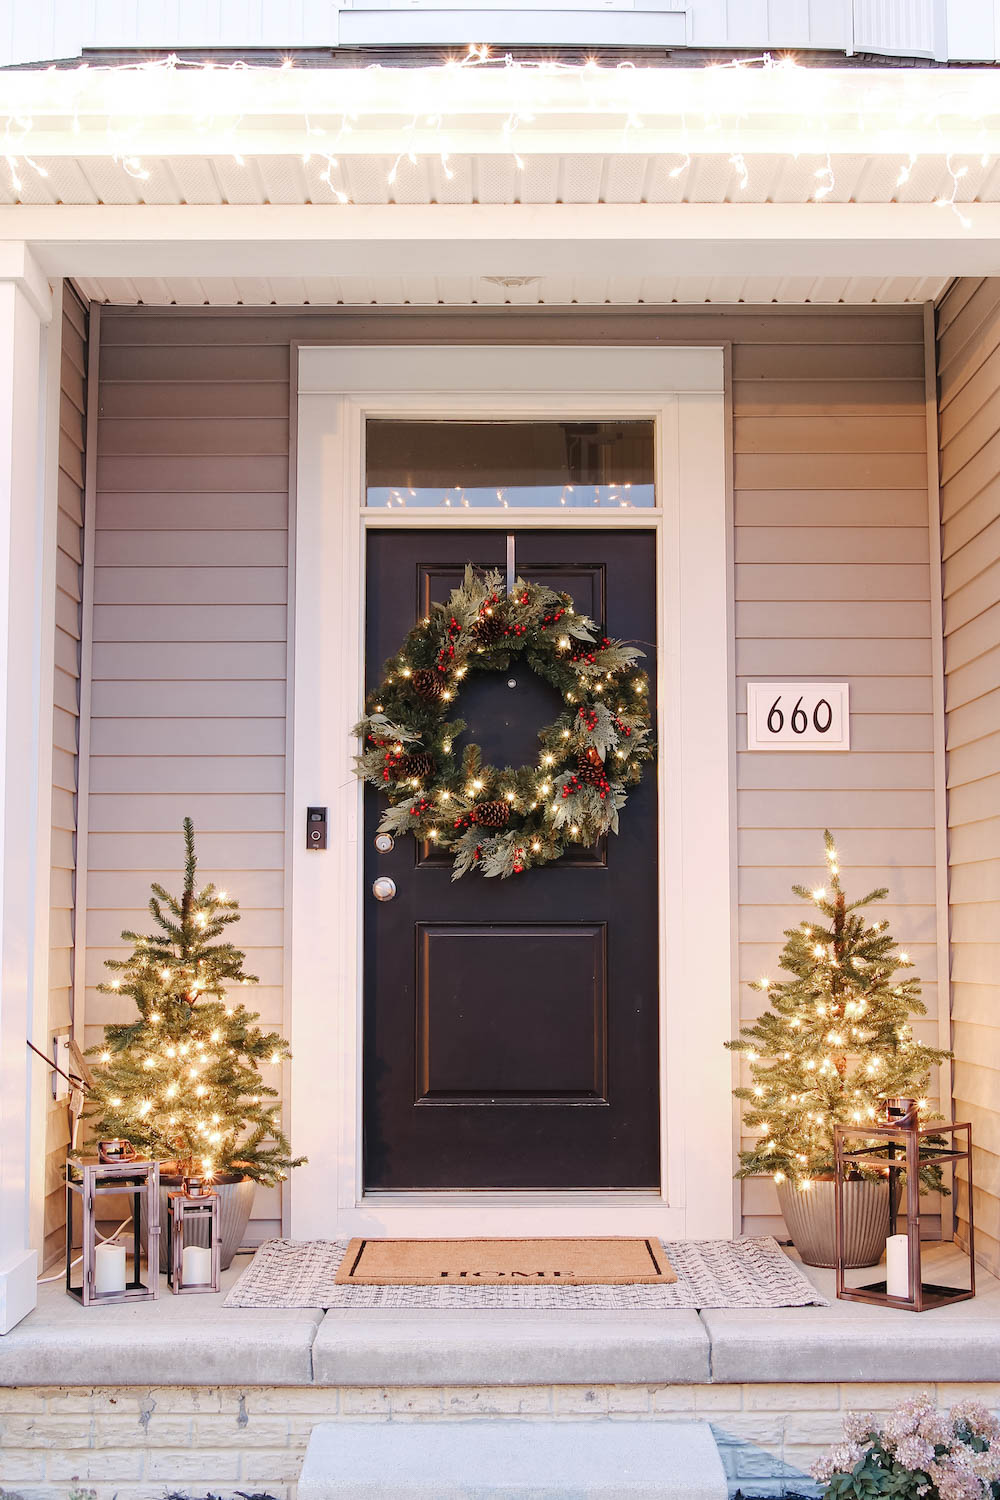 A front porch styled for the holidays with illuminated porch trees and oversized wreath